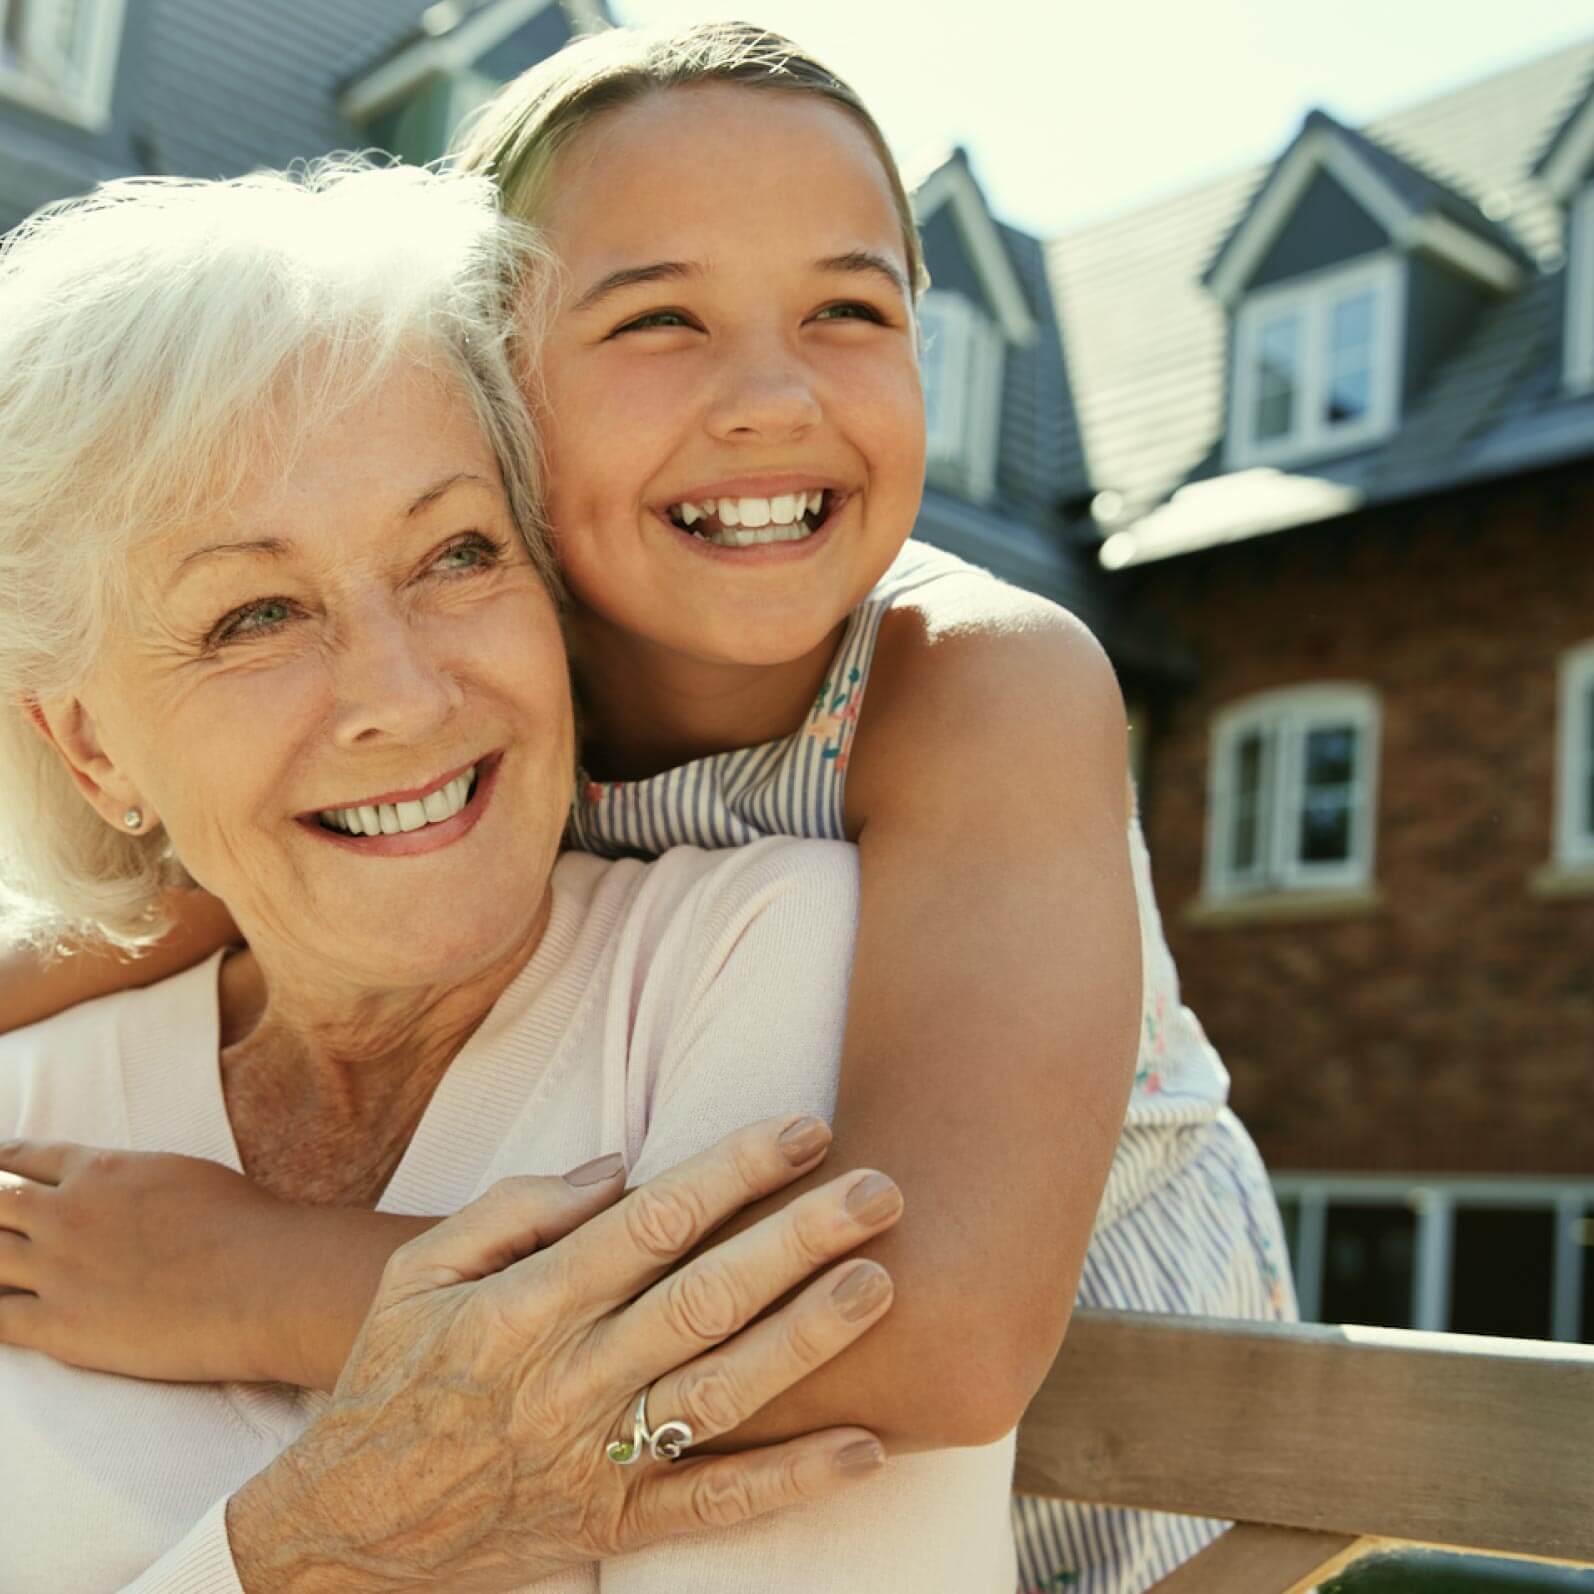 Mortgages For Seniors: Getting A Home Loan In Retirement?